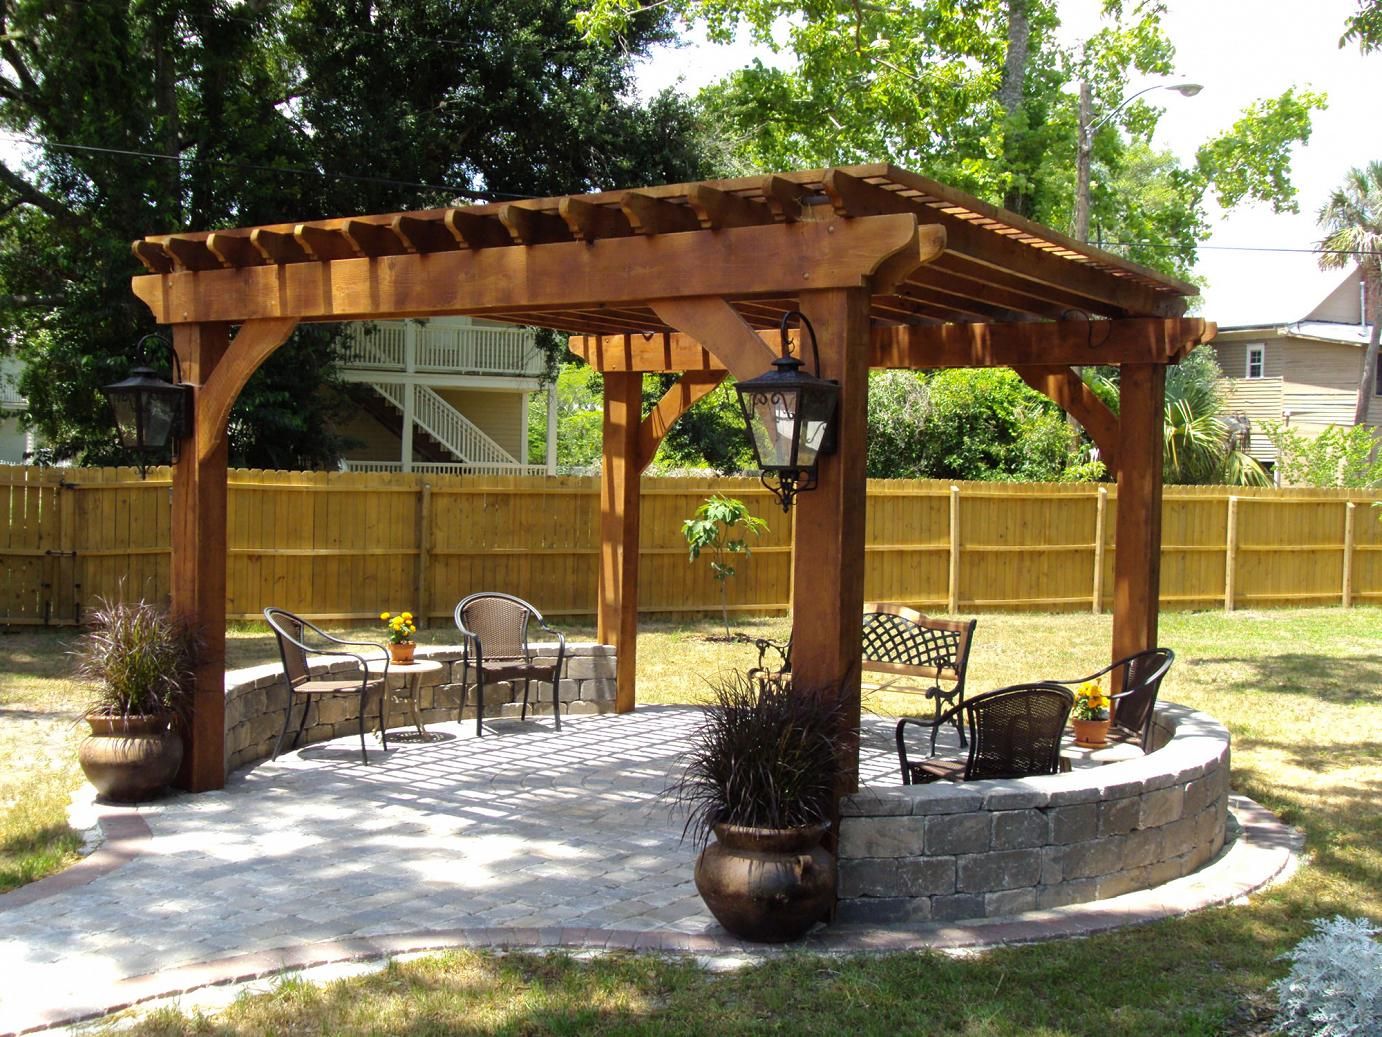 Outdoor Pergolas-Houston TX Landscape Designs & Outdoor Living Areas-We offer Landscape Design, Outdoor Patios & Pergolas, Outdoor Living Spaces, Stonescapes, Residential & Commercial Landscaping, Irrigation Installation & Repairs, Drainage Systems, Landscape Lighting, Outdoor Living Spaces, Tree Service, Lawn Service, and more.